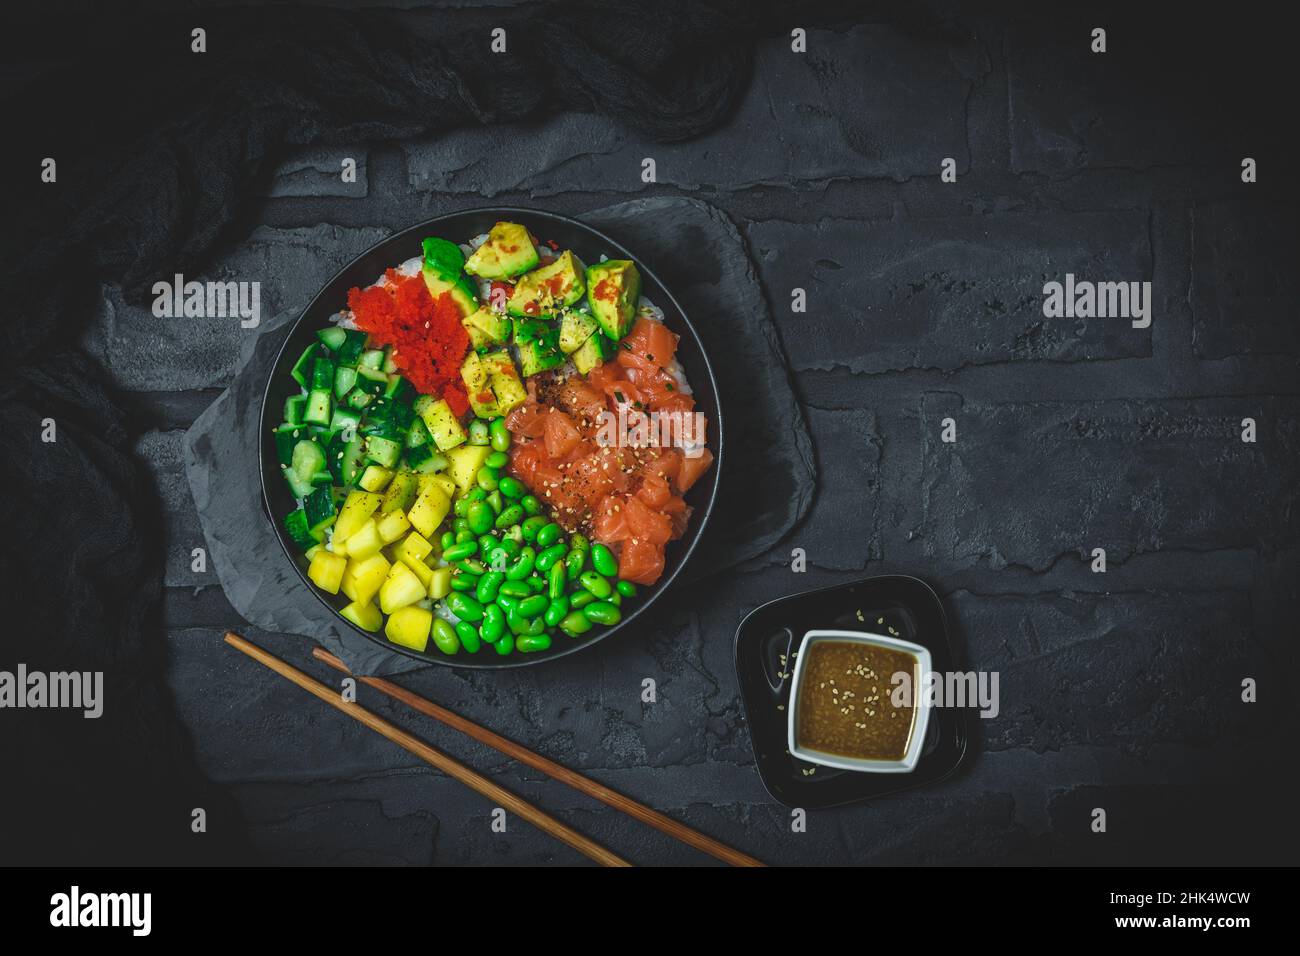 Japanese poke or buddha bowl with salmon, avocado, roe, mango, pies and cucumber in a black bowl on black background, top view with copy space Stock Photo